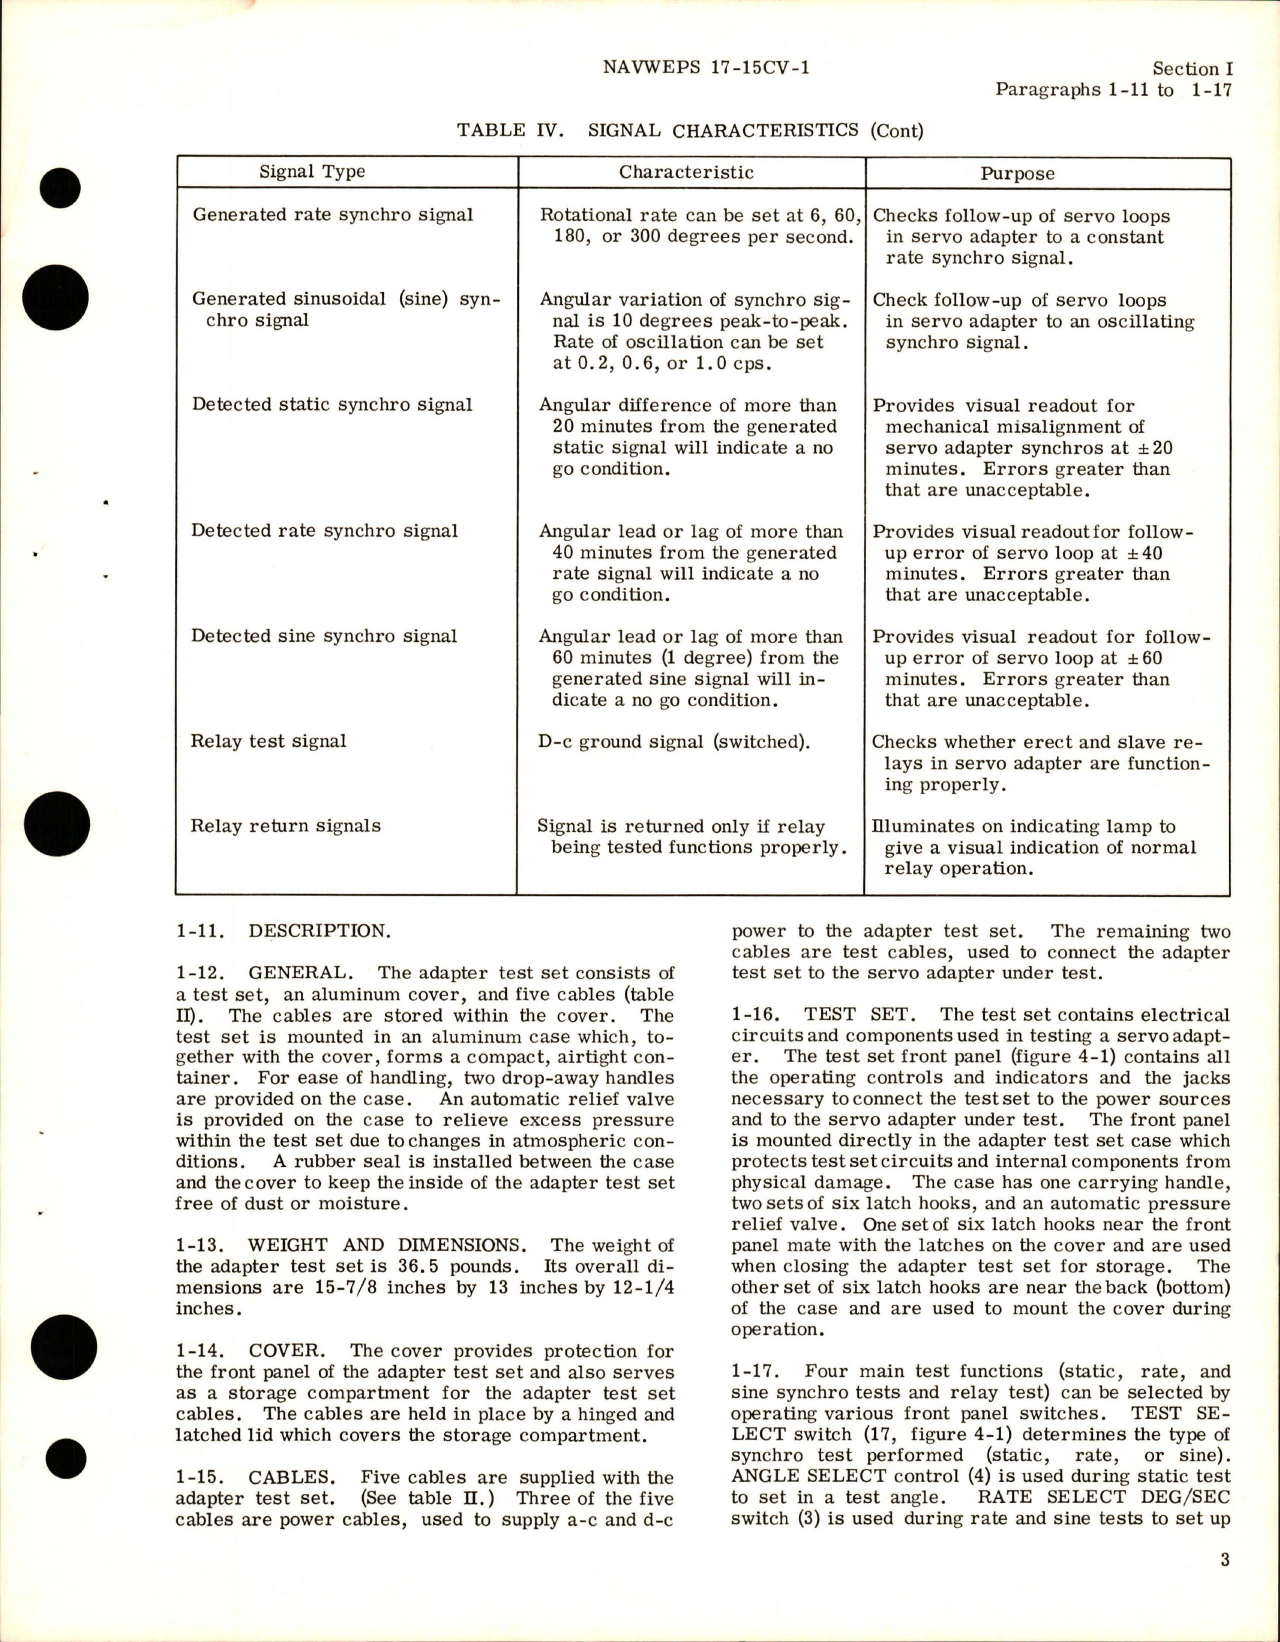 Sample page 9 from AirCorps Library document: Operation and Service Instructions with Illustrated Parts for Servo Adapter Test Set - ASM-151 - Part GAEC 121SEAV114